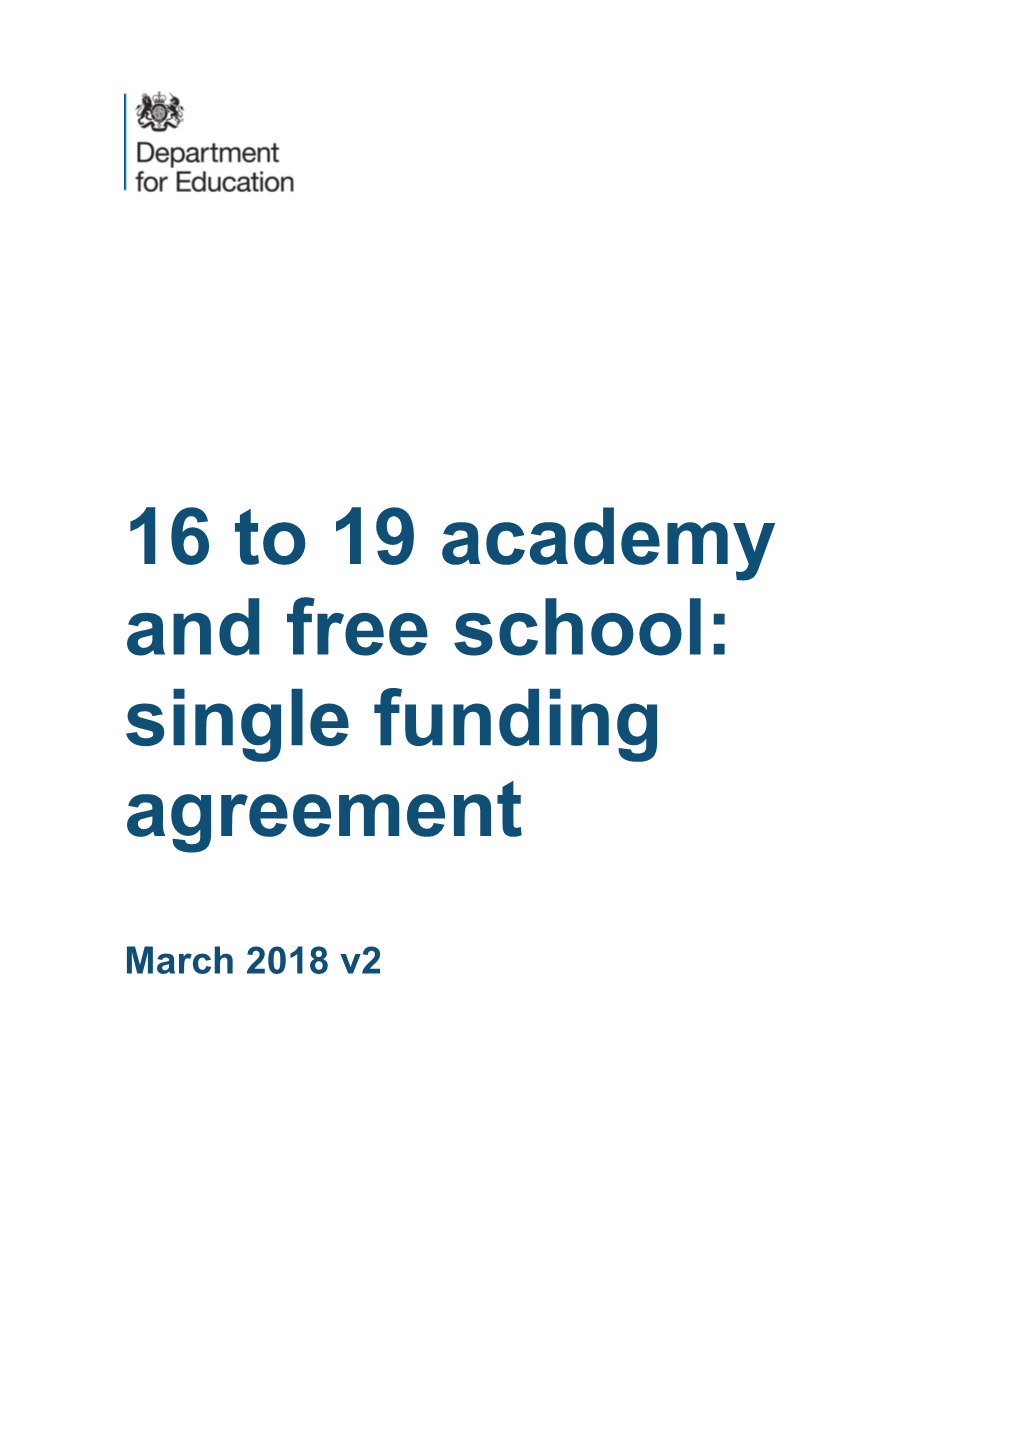 16 to 19 Academy and Free School: Single Funding Agreement March 18 V2